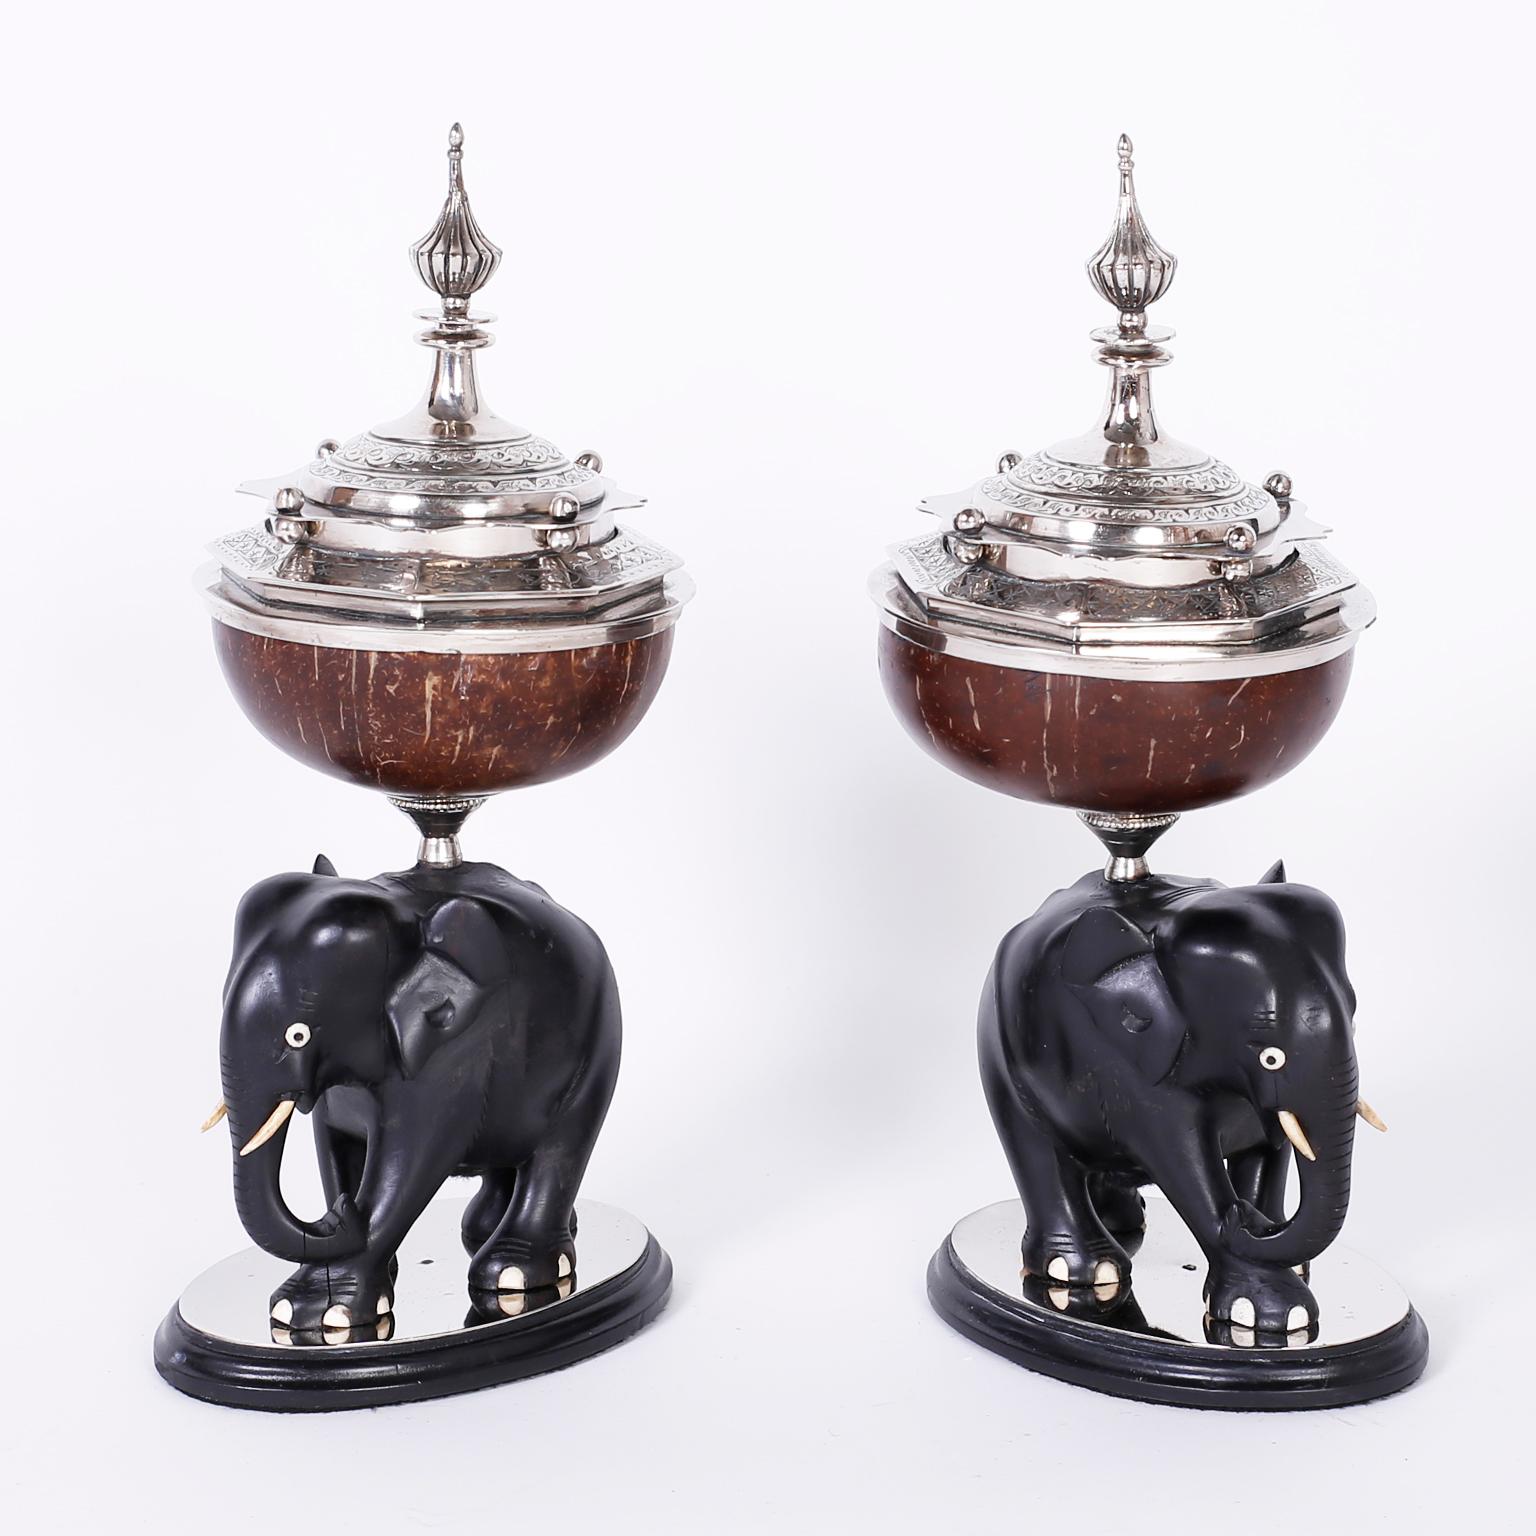 Antique Anglo-Indian garniture boxes featuring silvered metal lids, dramatic finials and hand-hammered floral and geometric designs over a coconut vessel. The carved ebony elephants have bone eyes, tusks and toes, all this presented on metal and